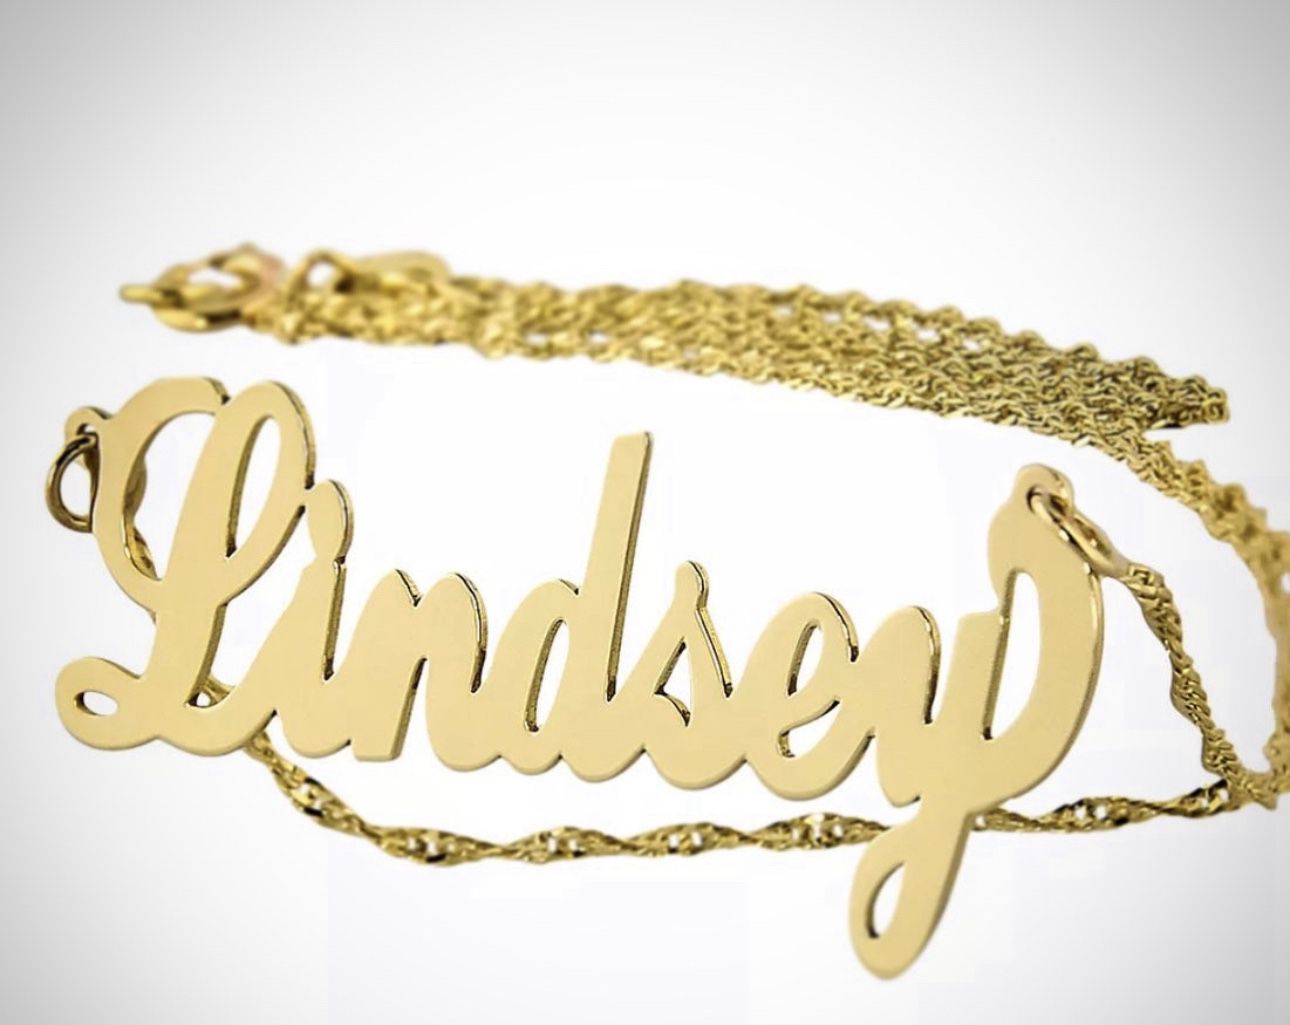 Custom Personalized Name Necklace 10k Gold With Chain